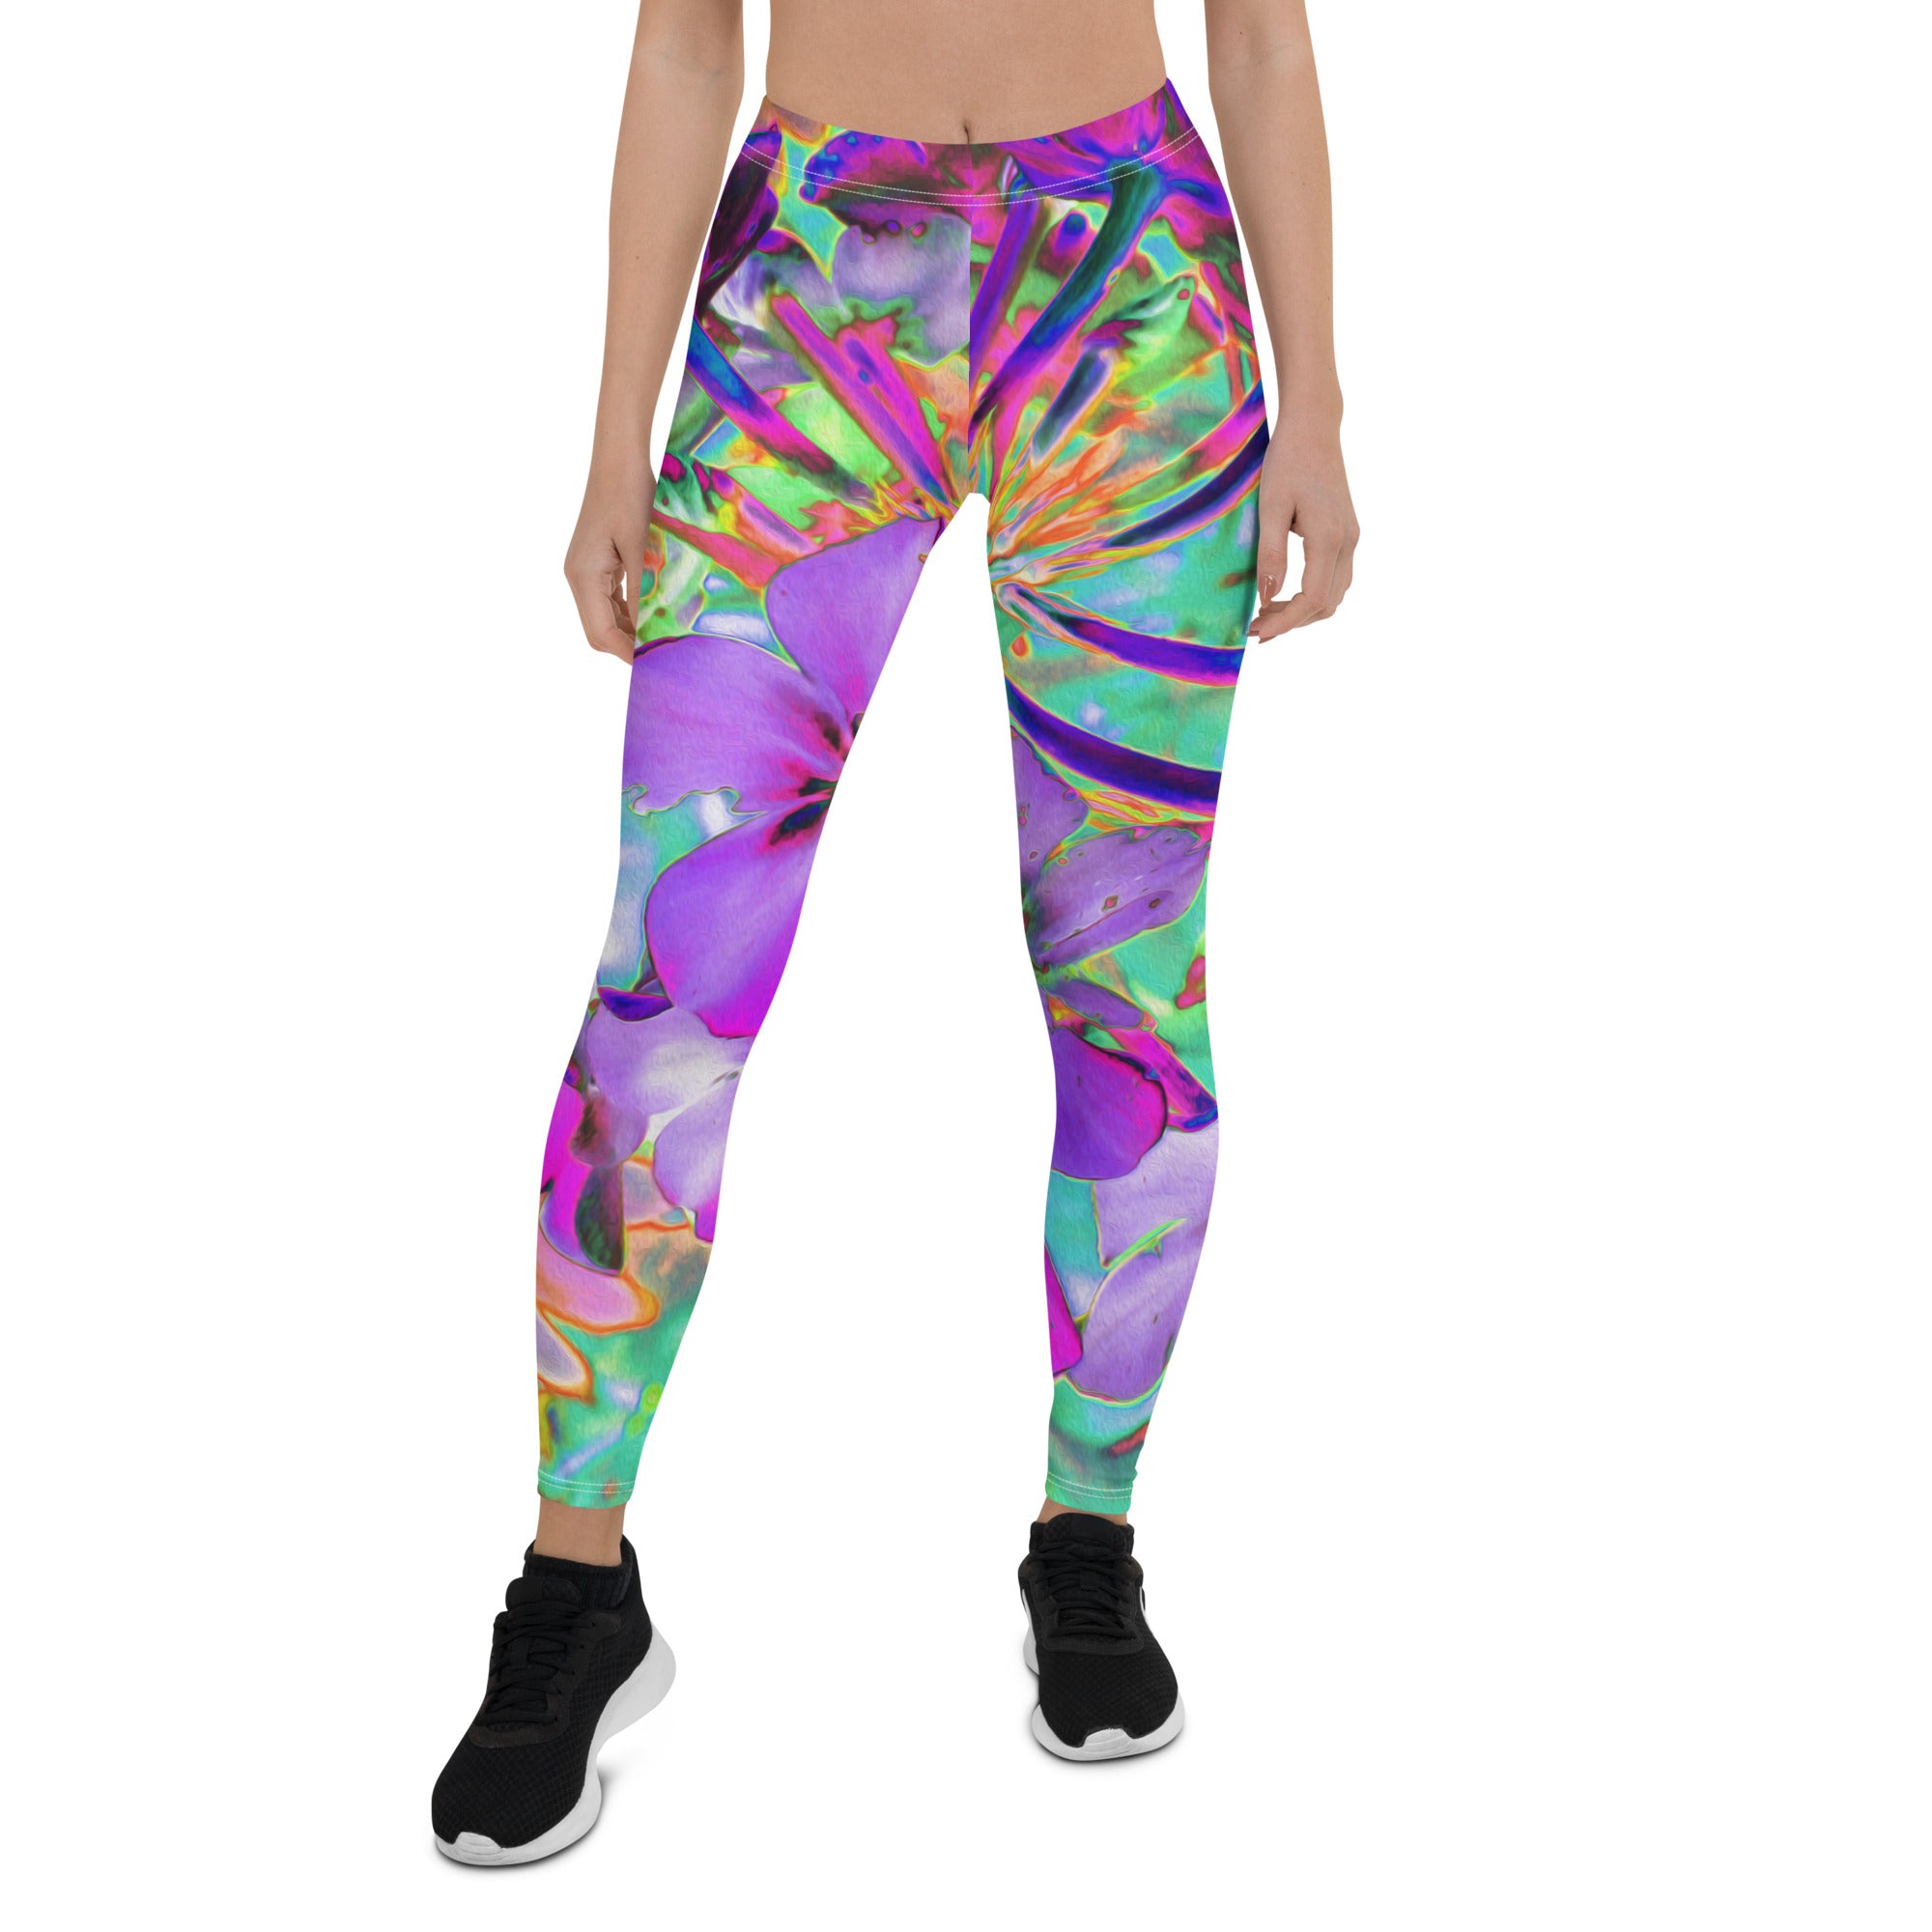 Leggings for Women, Dramatic Psychedelic Magenta and Purple Flowers